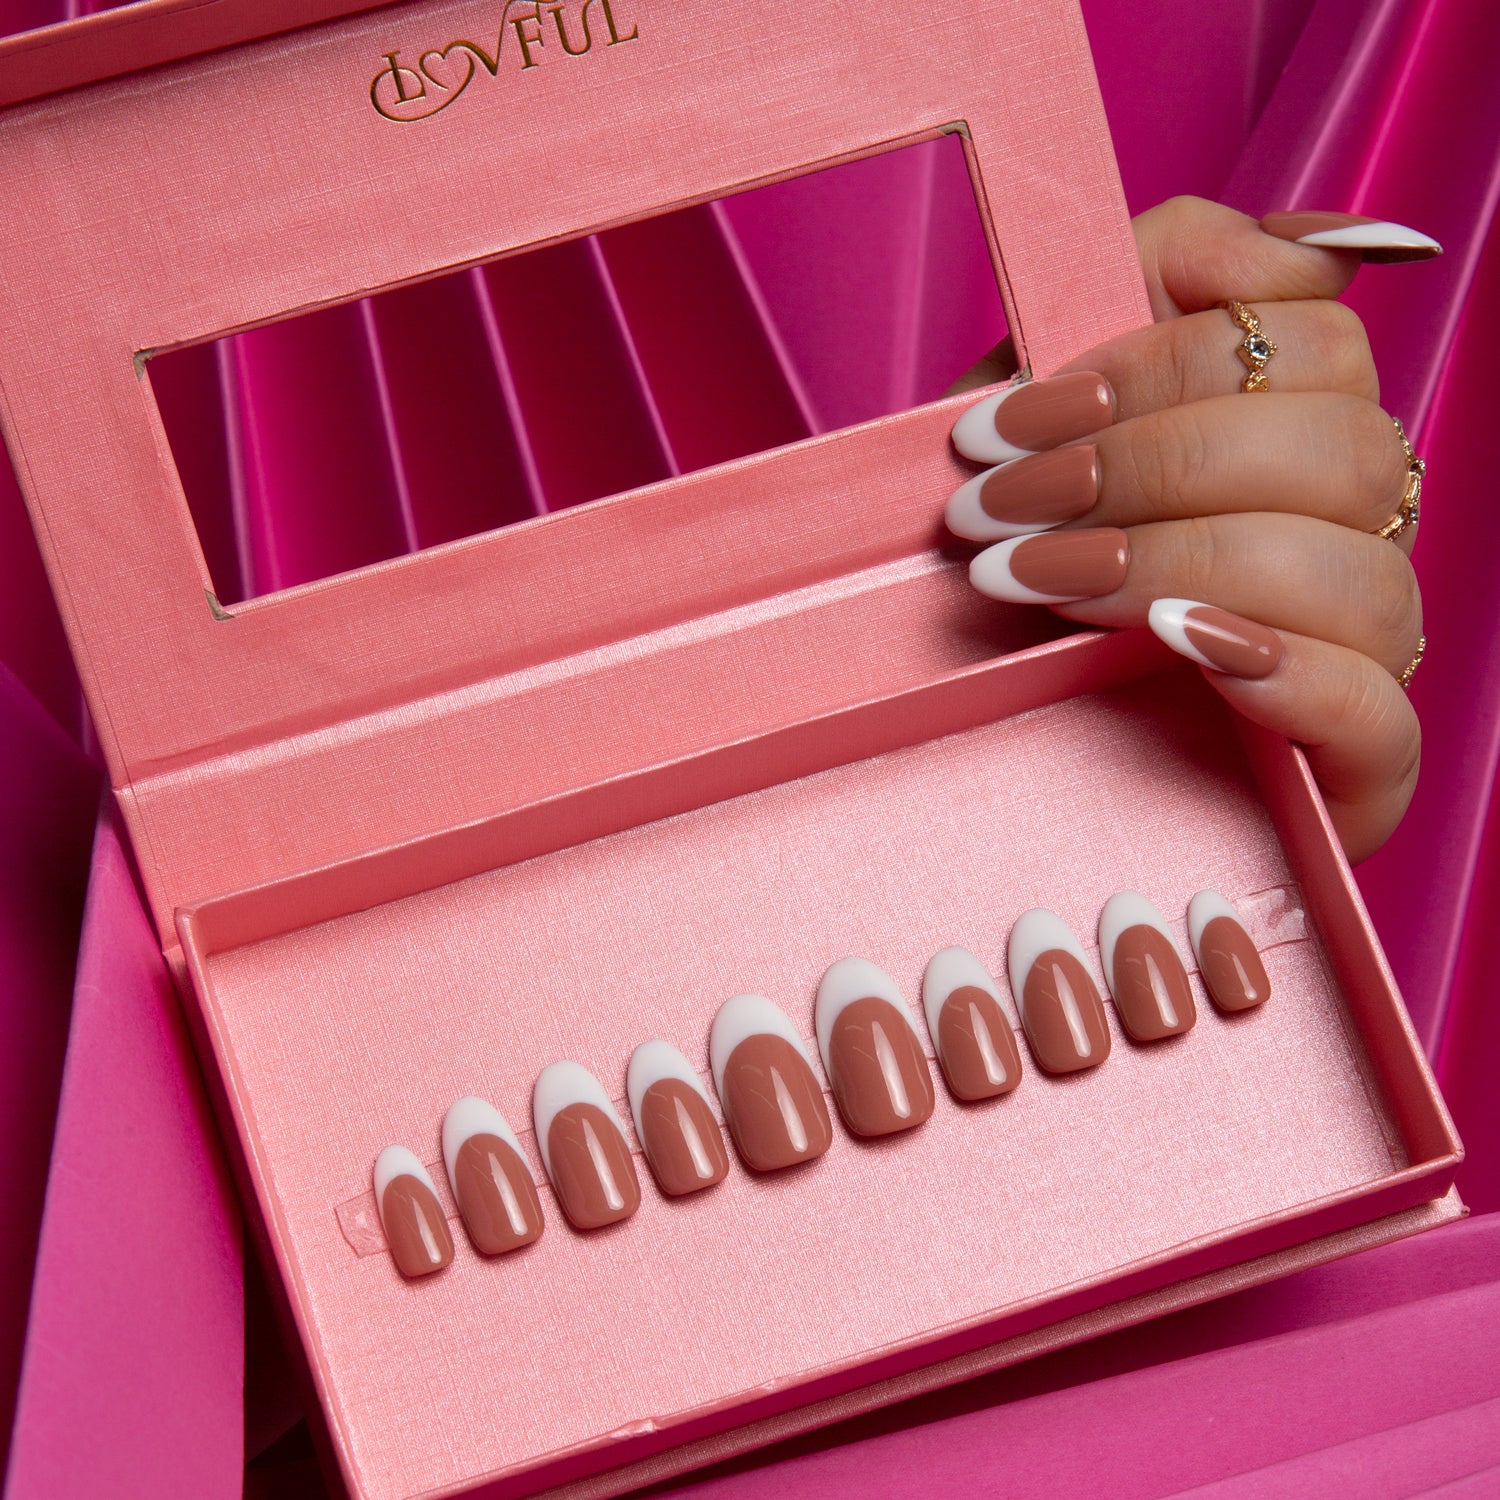 Hand displaying Coffee Latte French Tip press-on nails in a pink Lovful box, showcasing latte-colored nails with white French tips. Nail set is elegantly arranged in the box.